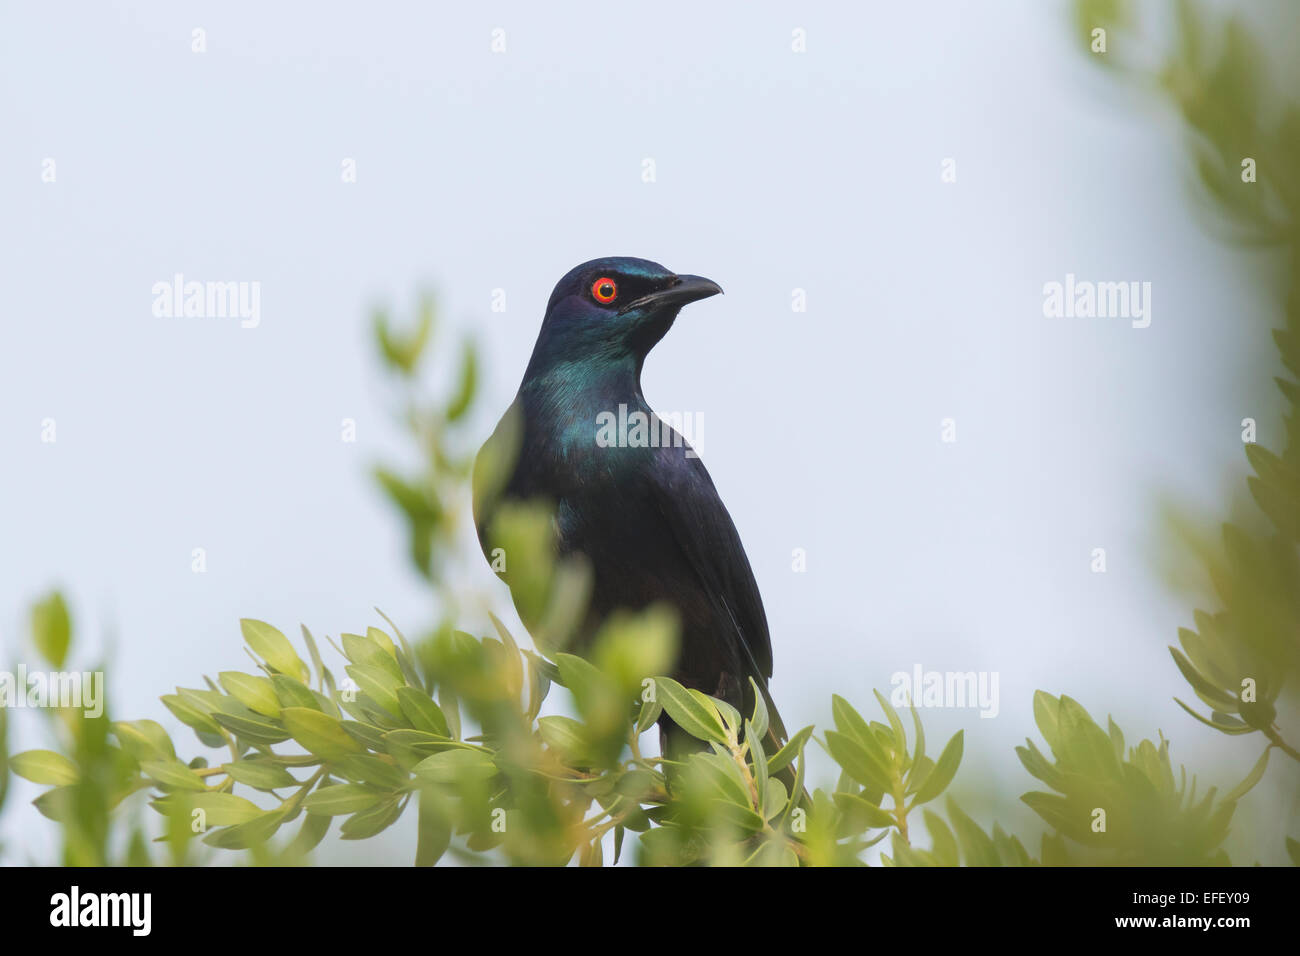 Close-up of a Black-bellied Glossy Starling (Notopholia corrusca), a spectacular colored bird, perched in a tree Stock Photo